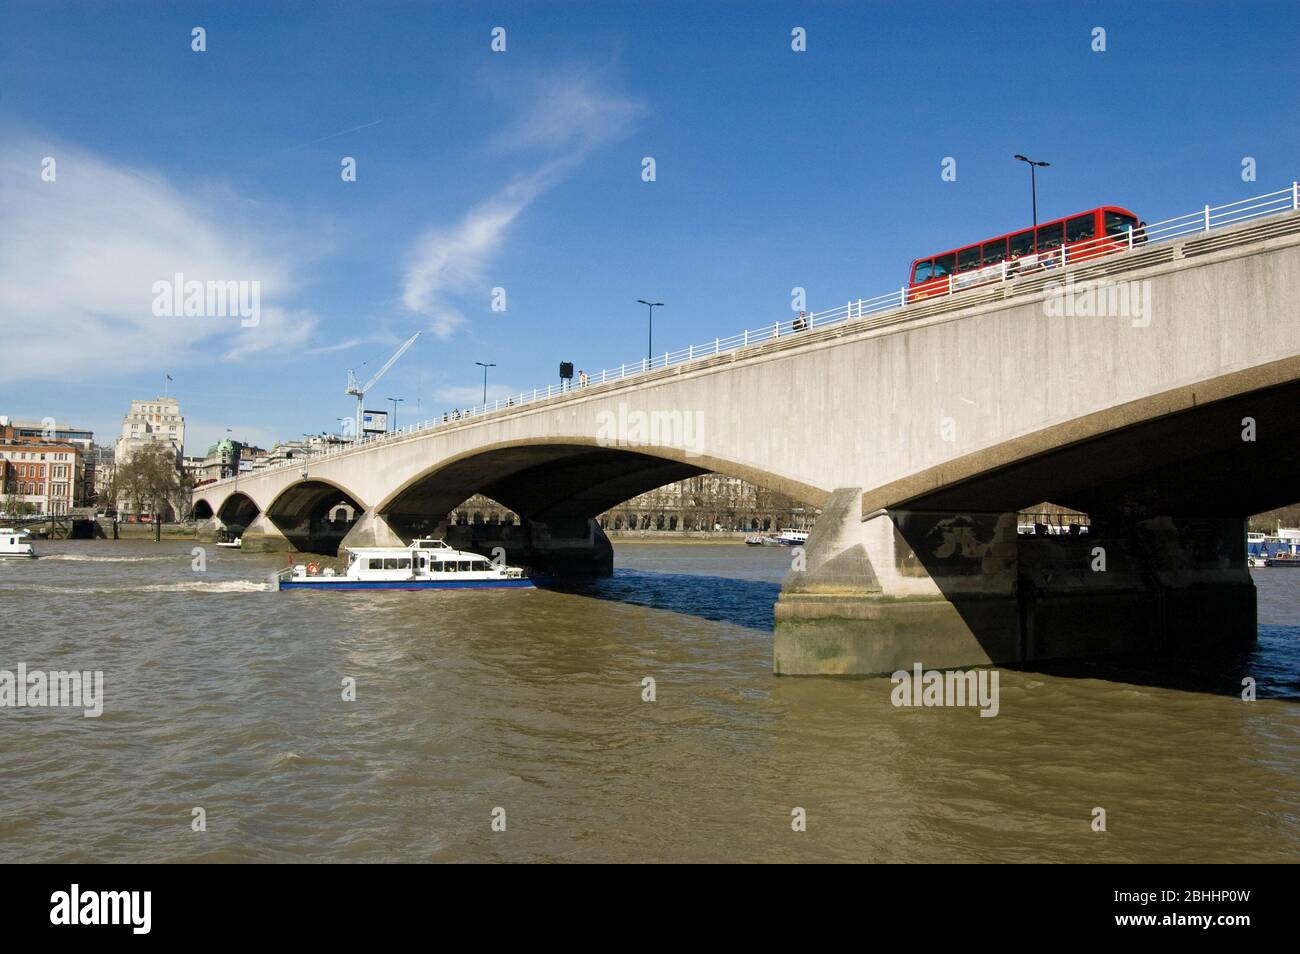 View from the South Bank of Waterloo Bridge over the River Thames. Stock Photo